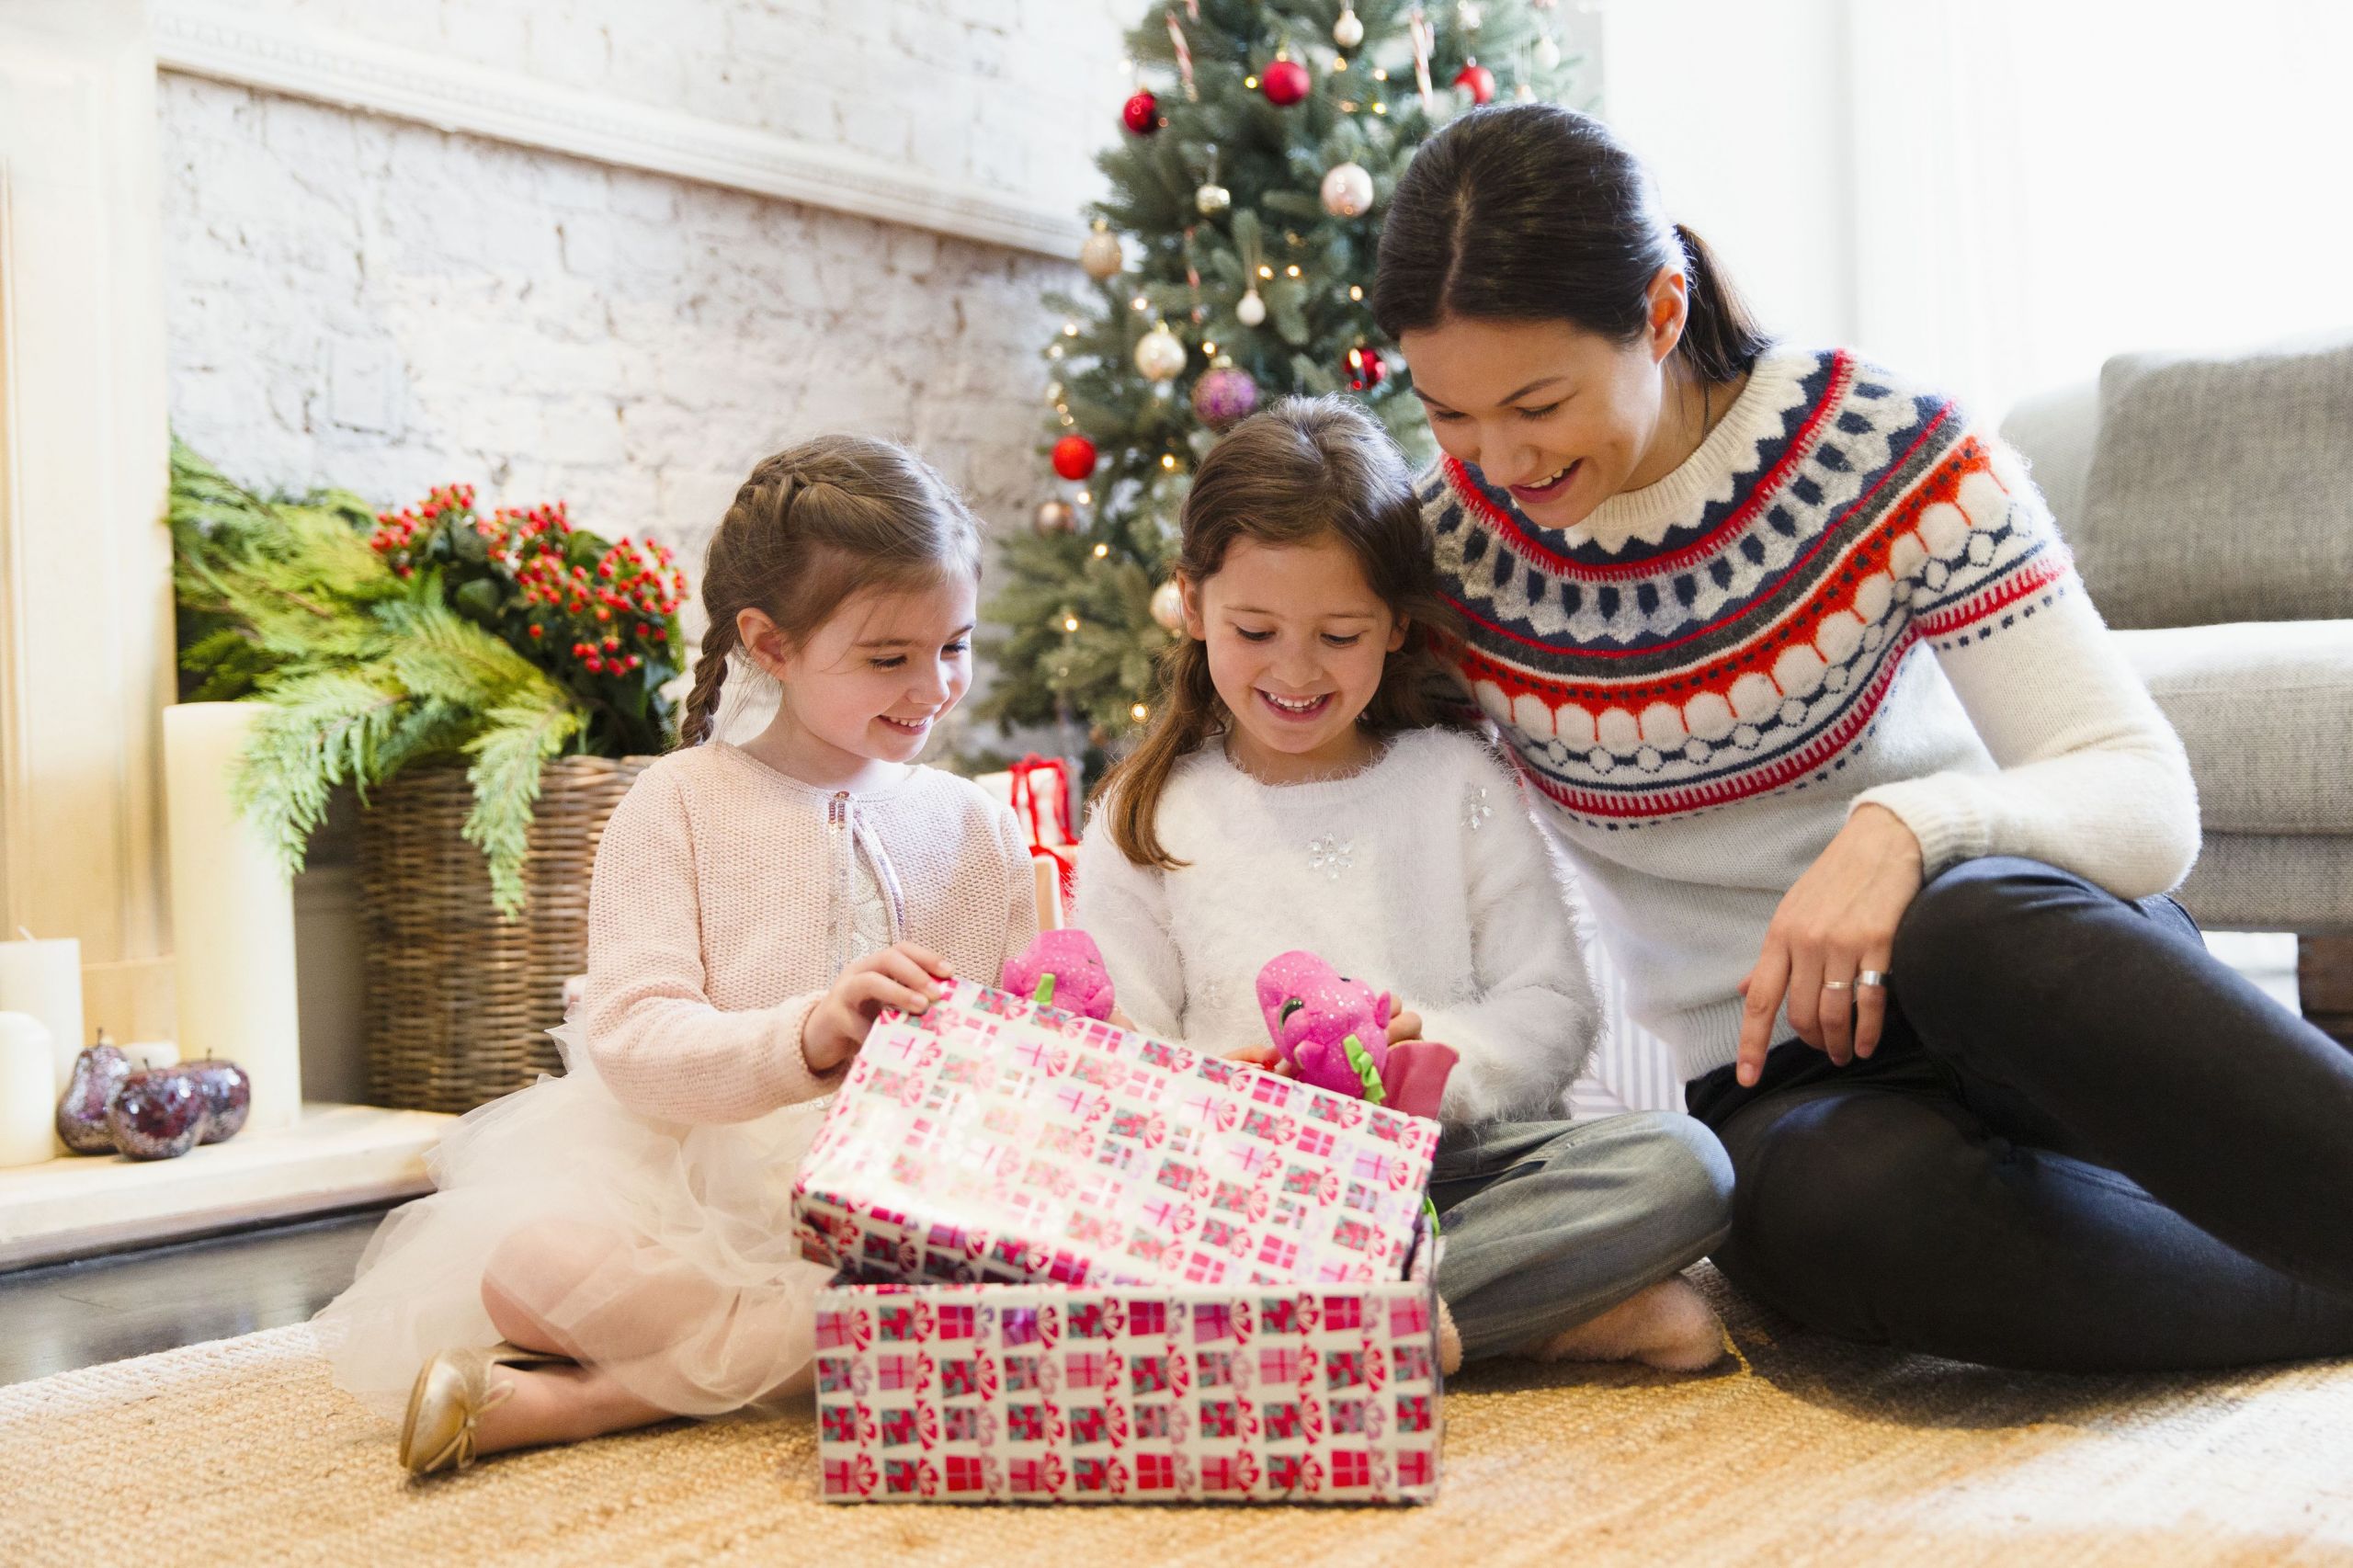 Family Christmas Gift Ideas 2020
 The 11 Best Gifts for the Whole Family in 2020